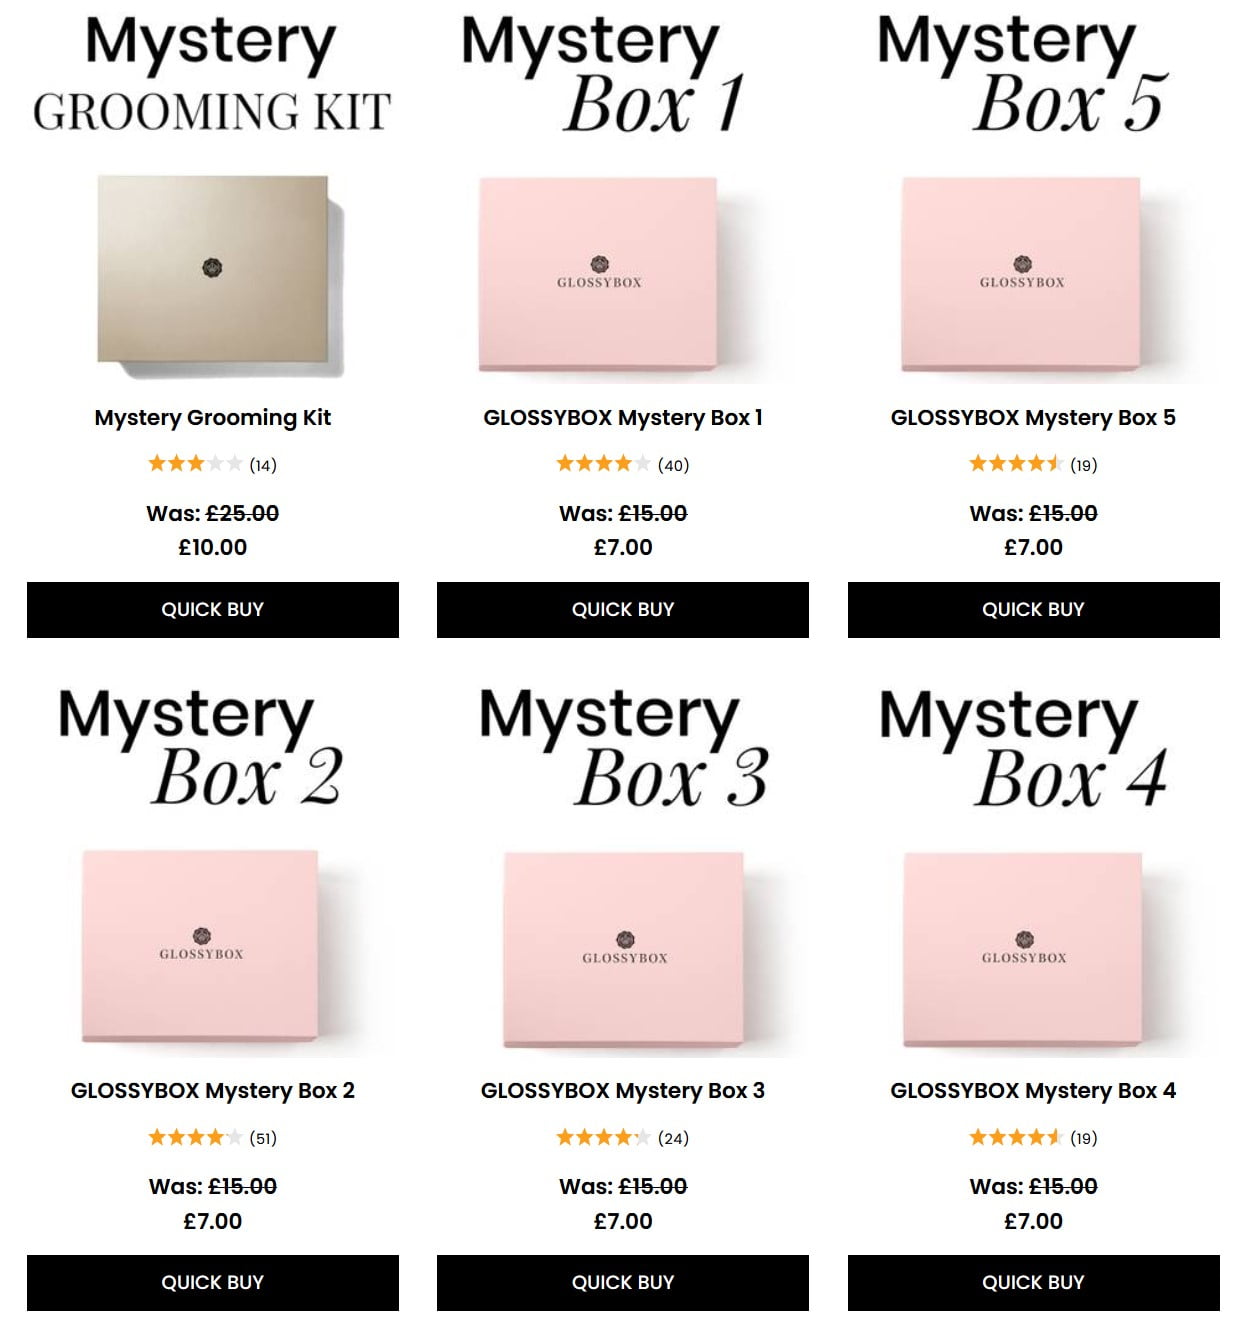 50% off Glossybox Mystery Boxes